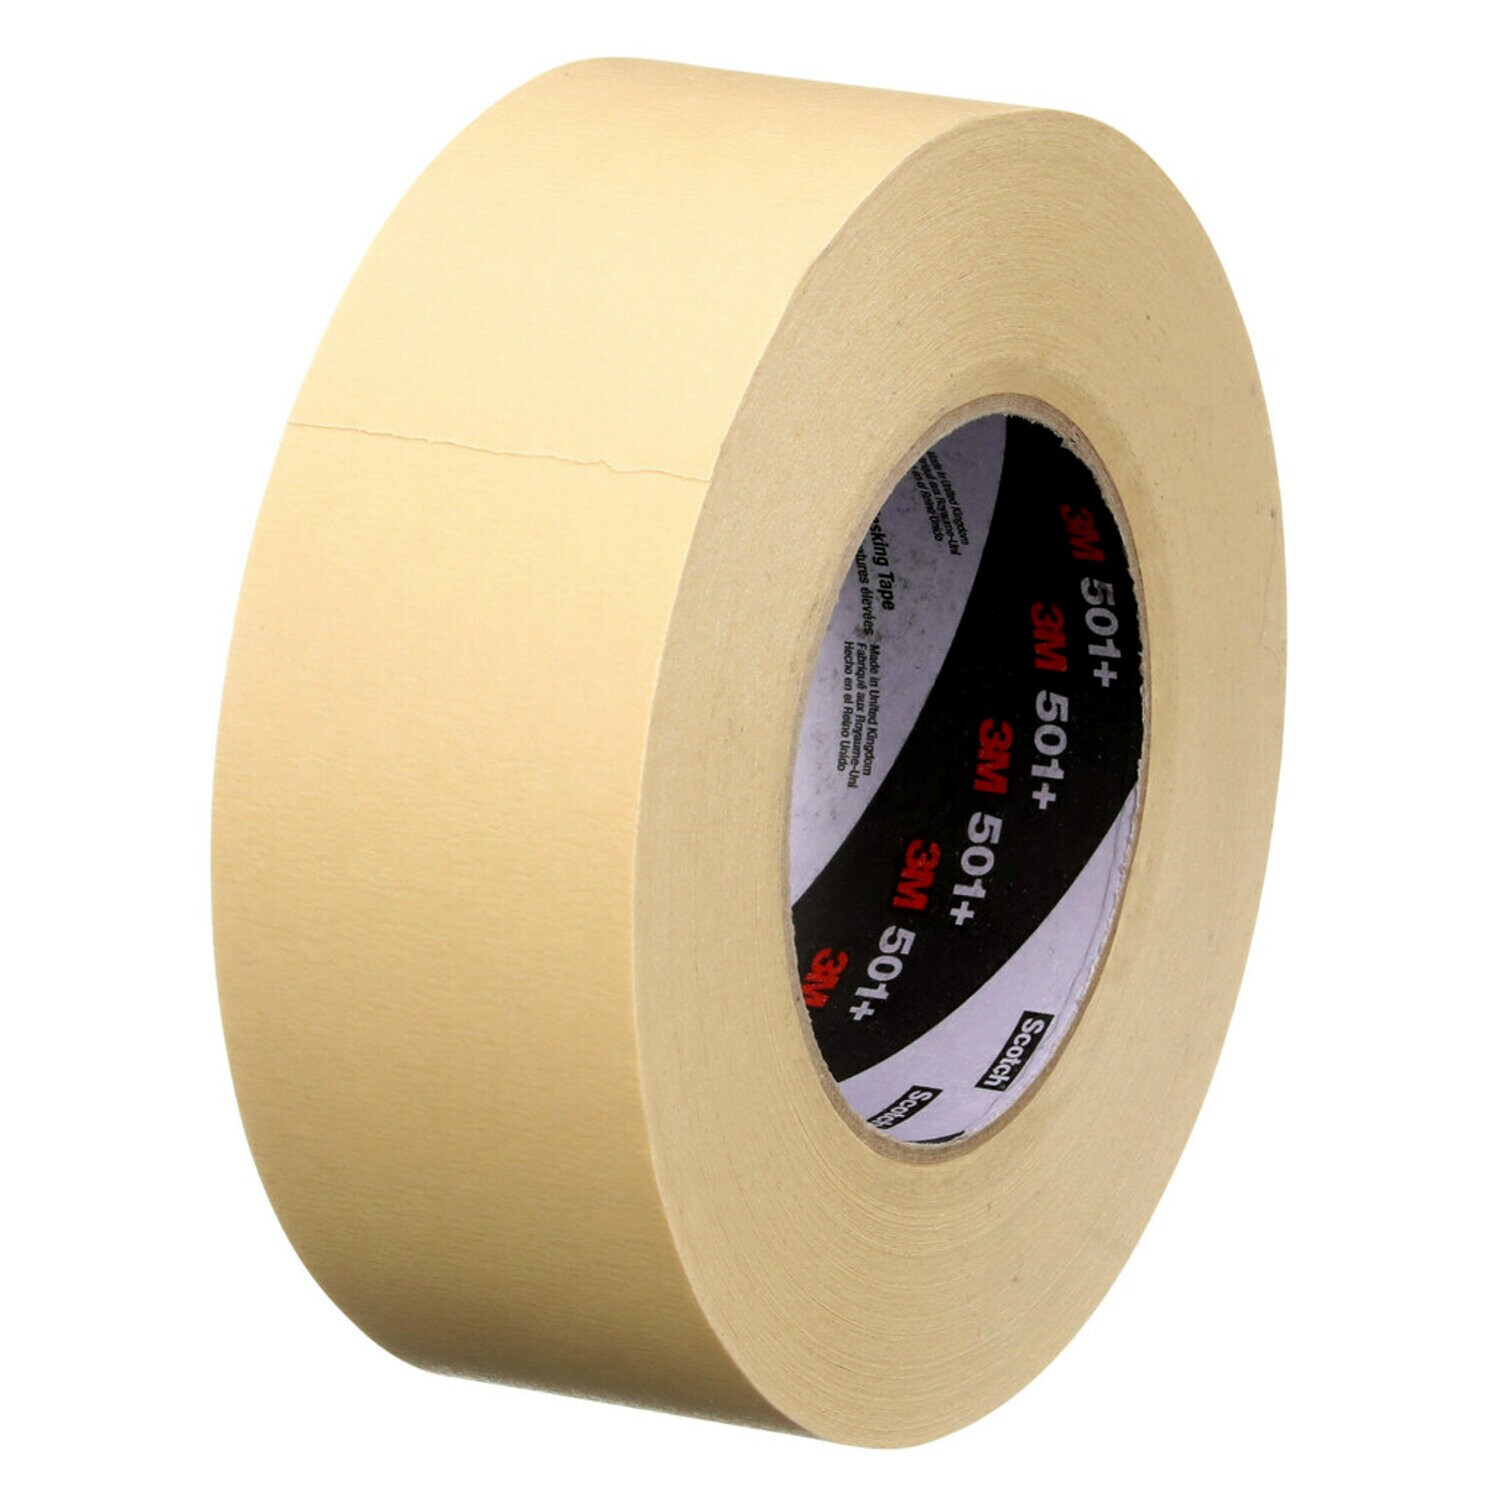 7000138488 - 3M Specialty High Temperature Masking Tape 501+, Tan, 48 mm x 55 m, 7.3
mil, 24 Rolls/Case